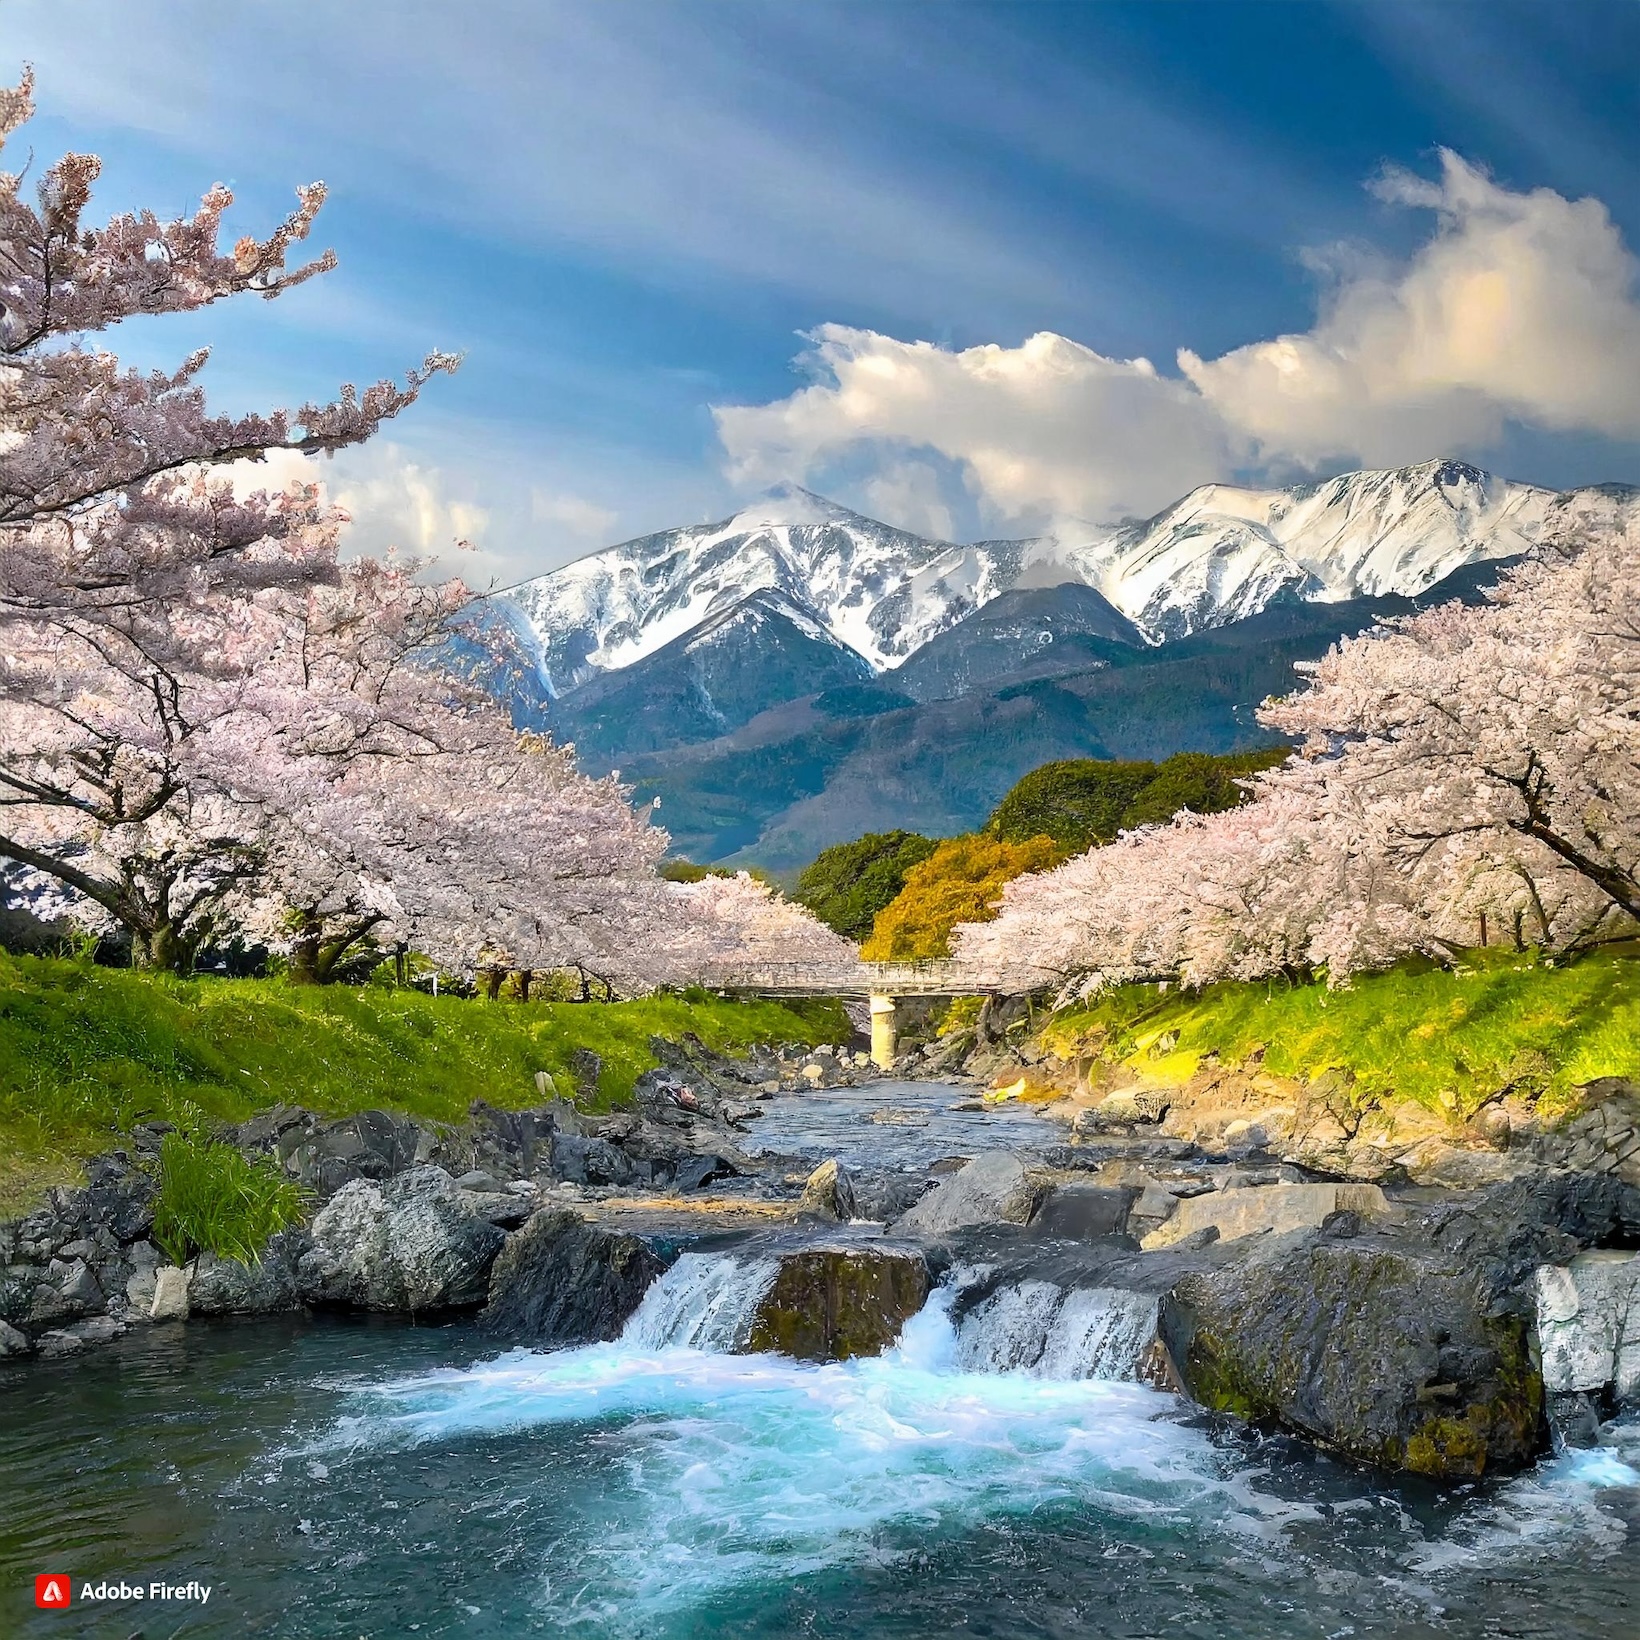  Firefly cherry blossom trees blowing in the wind while koi fish swim freely down a freshwater stream